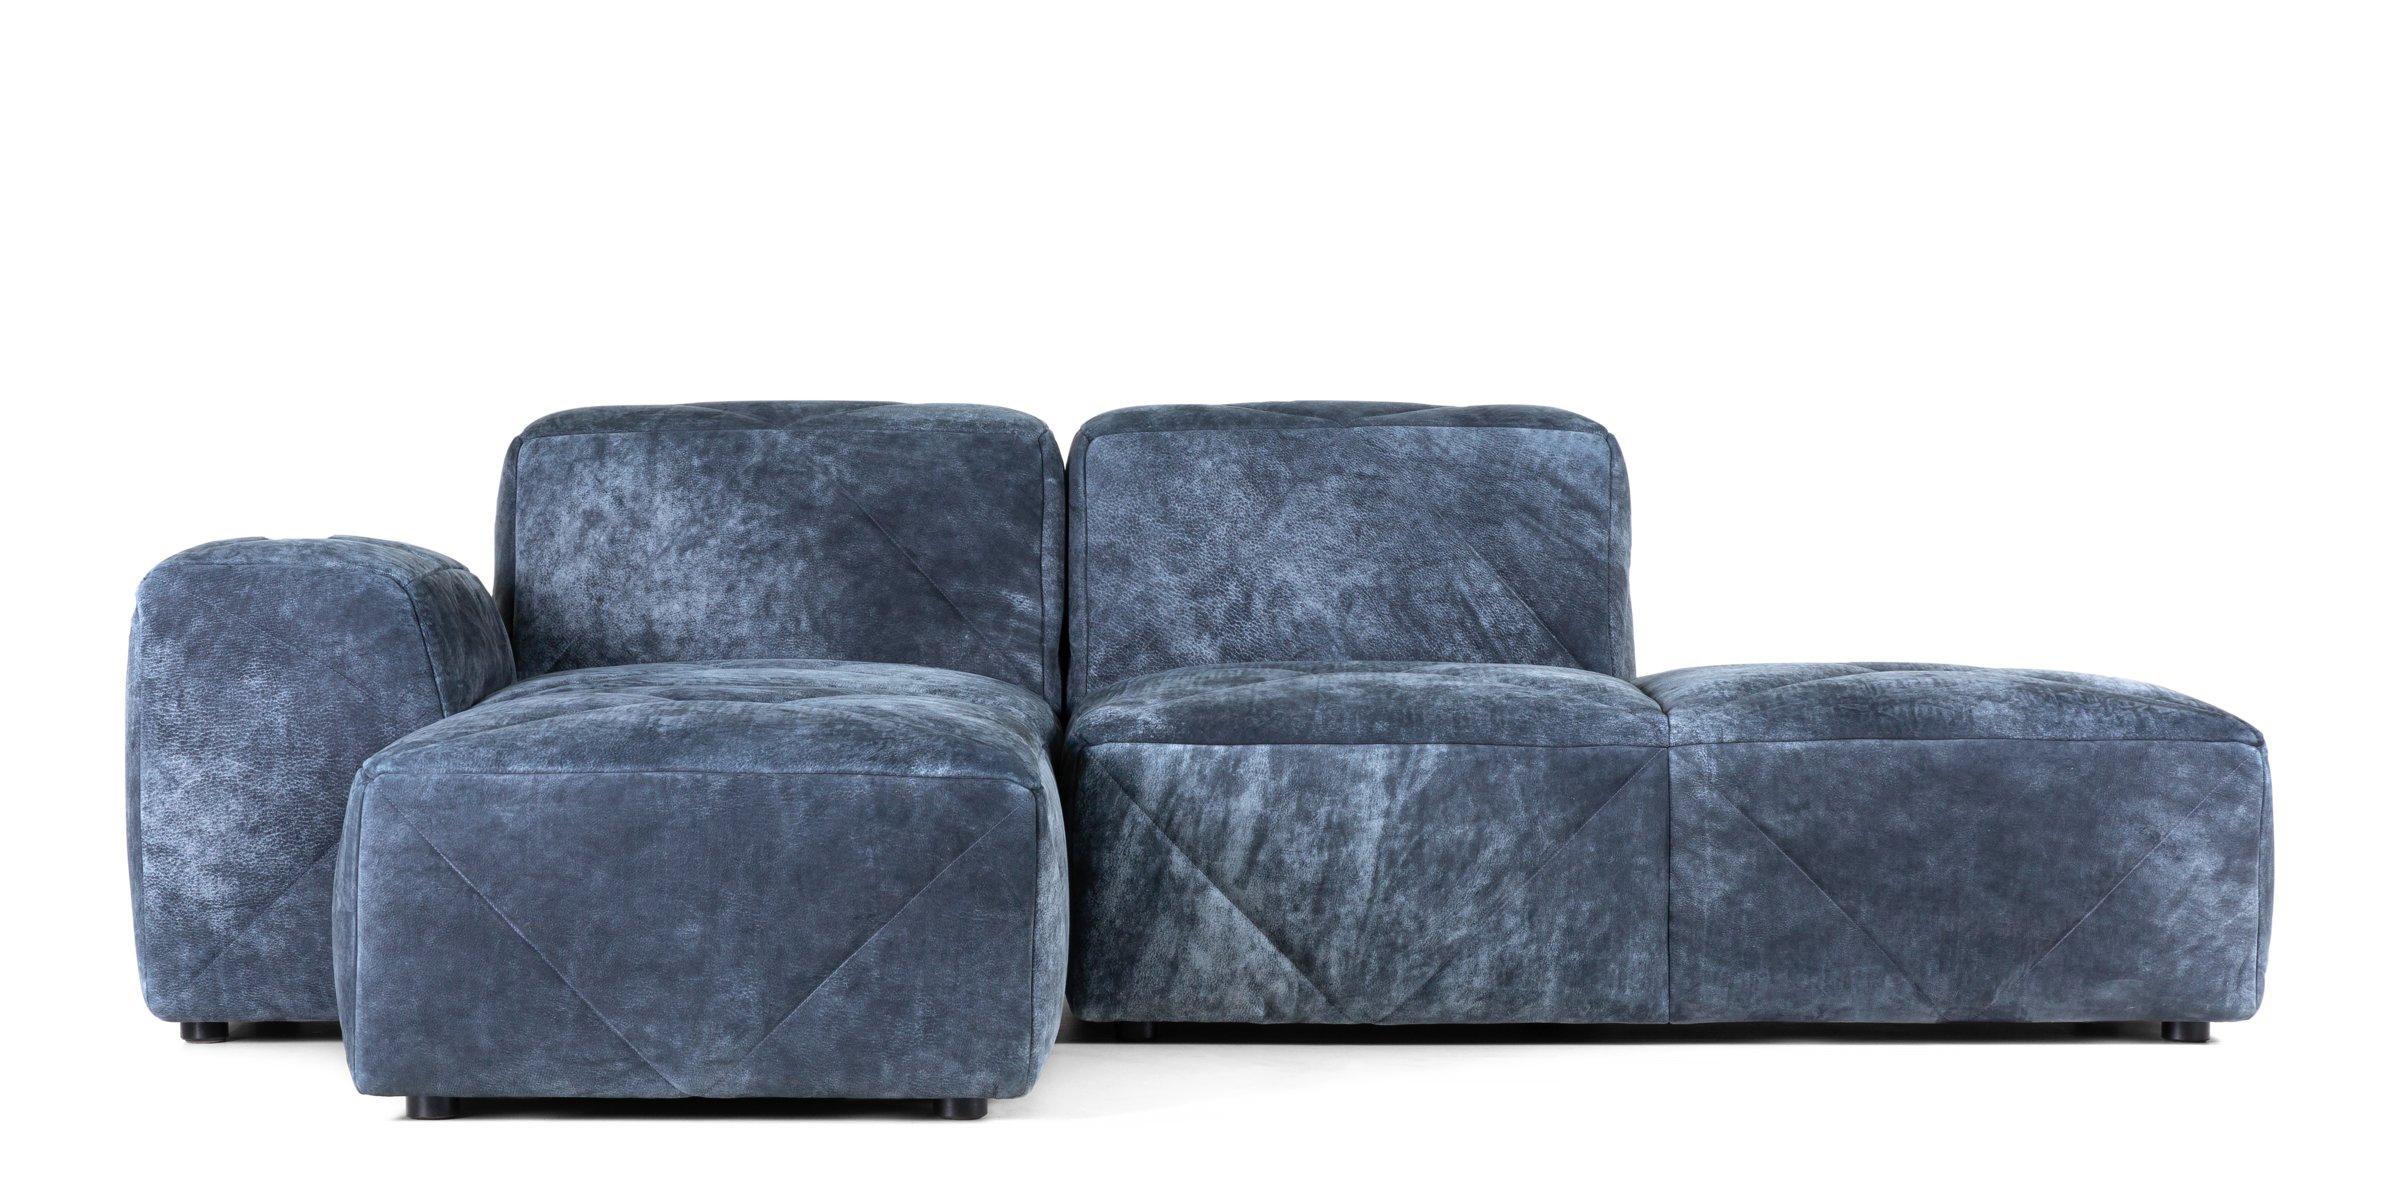 The award-winning BFF sofa by Marcel Wanders is everyone's new best friend! A high quality, soft yet firm modular sofa system, consisting of a wide variety of modules for endless configurations. A modular sofa system that will befriend any interior.